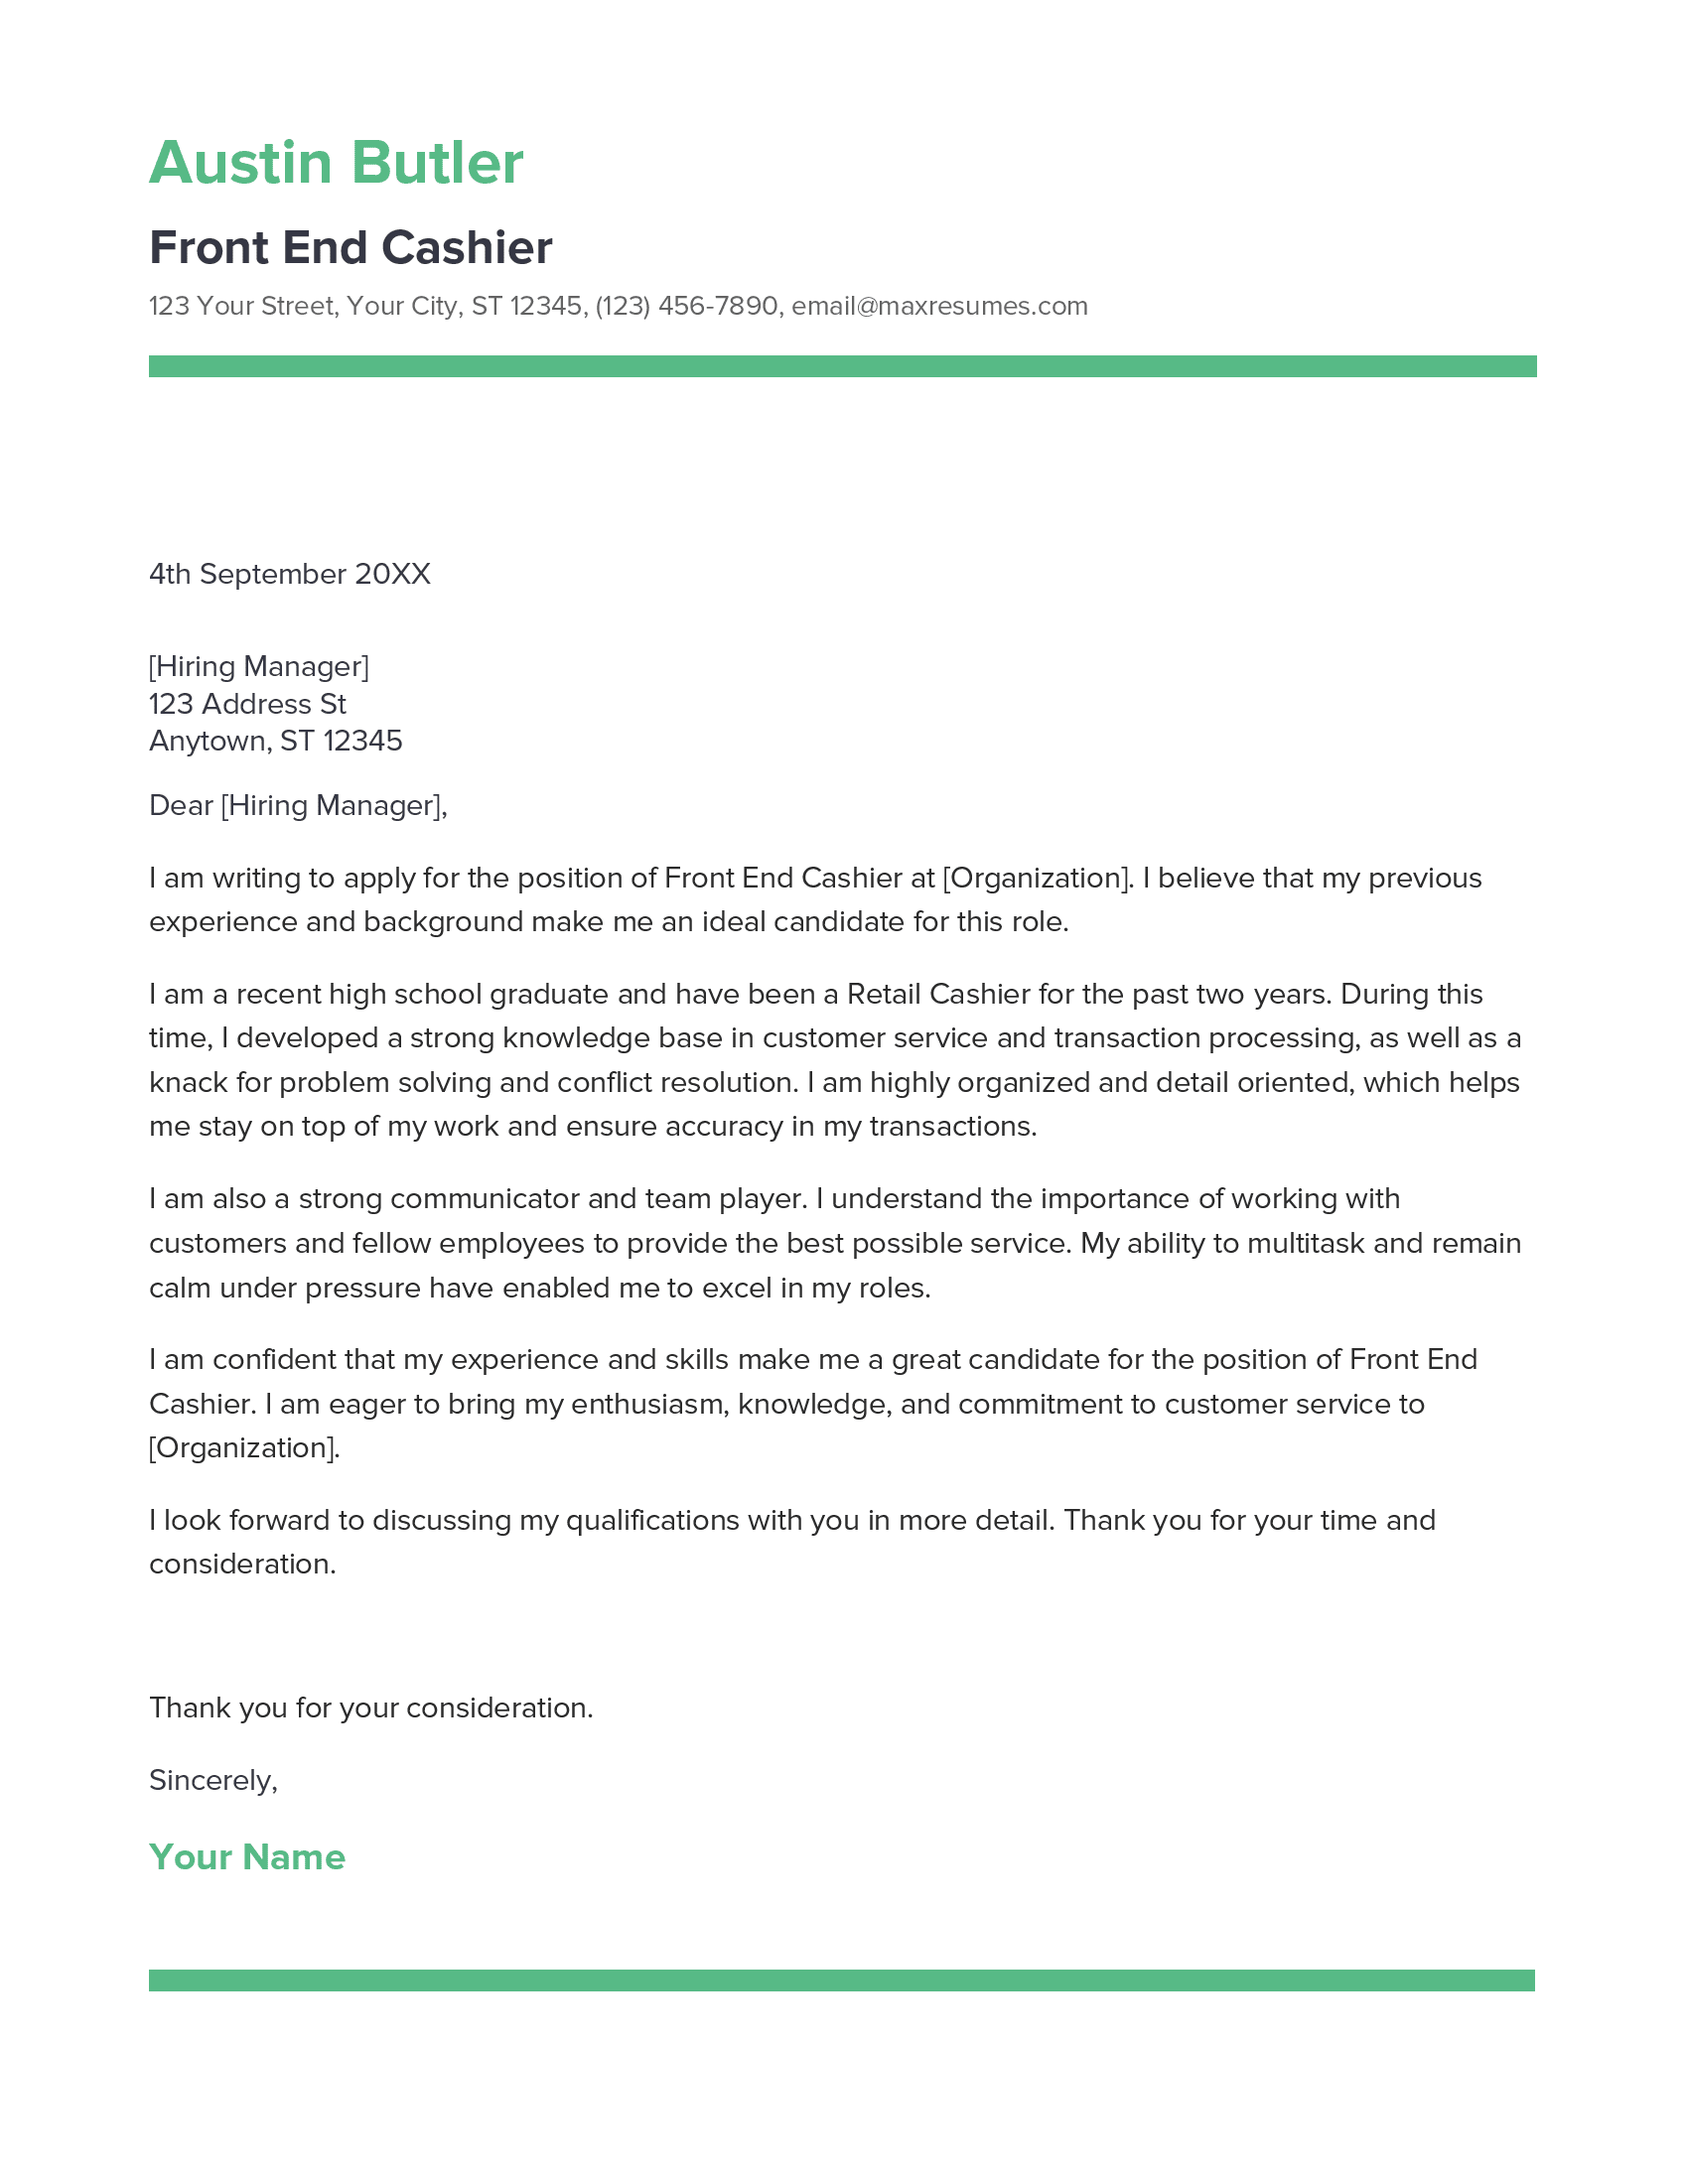 Front End Cashier Cover Letter Example